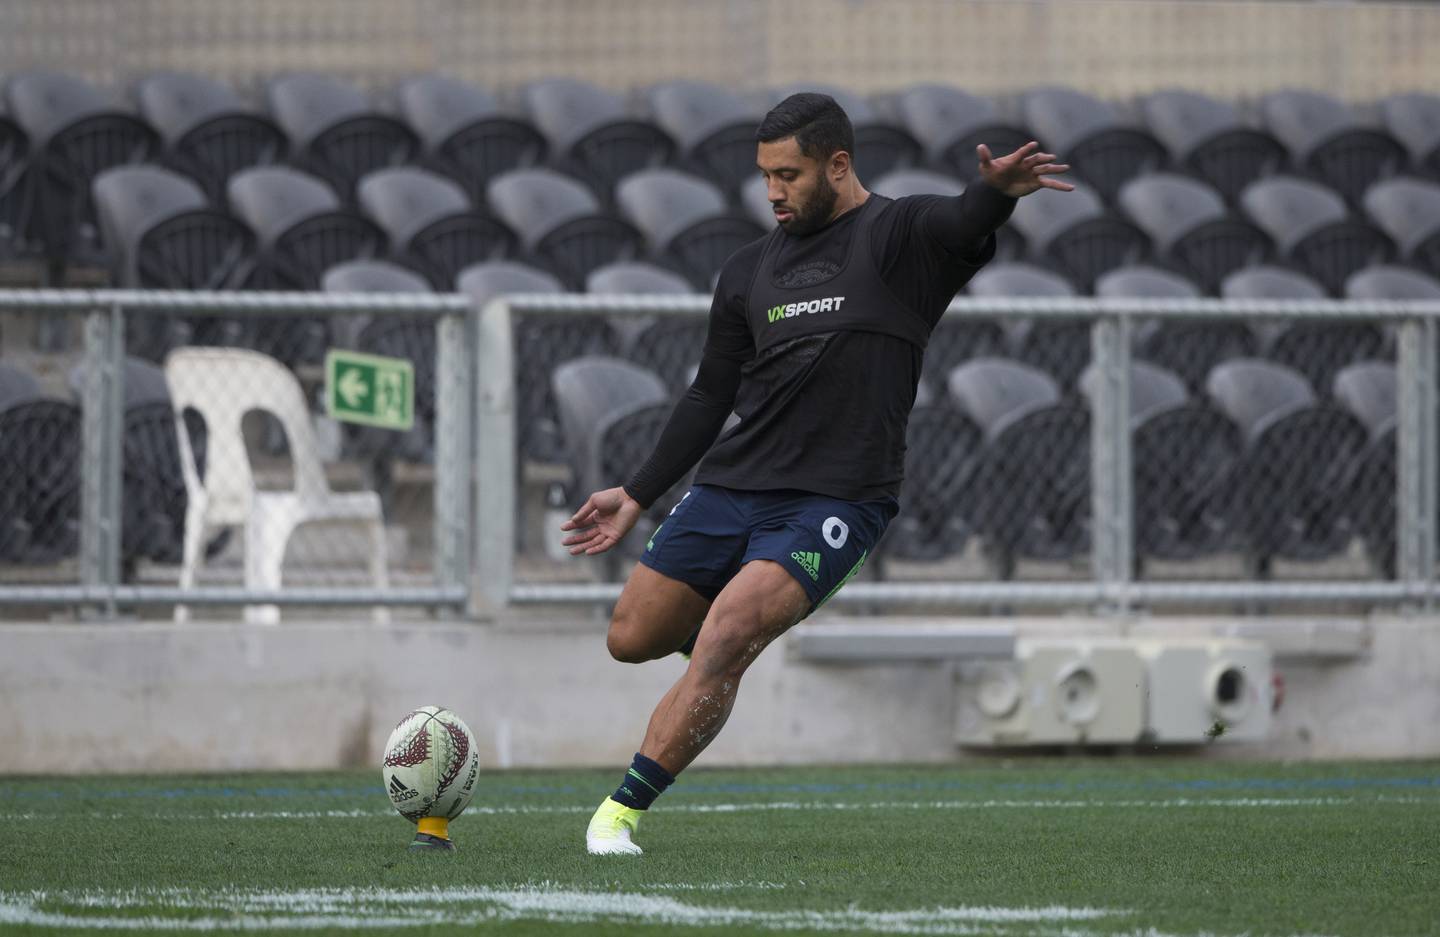 The new global competition "undermines the spirit of inclusivity" in rugby, says Lima Sopoaga. Photo / Brett Phibbs
